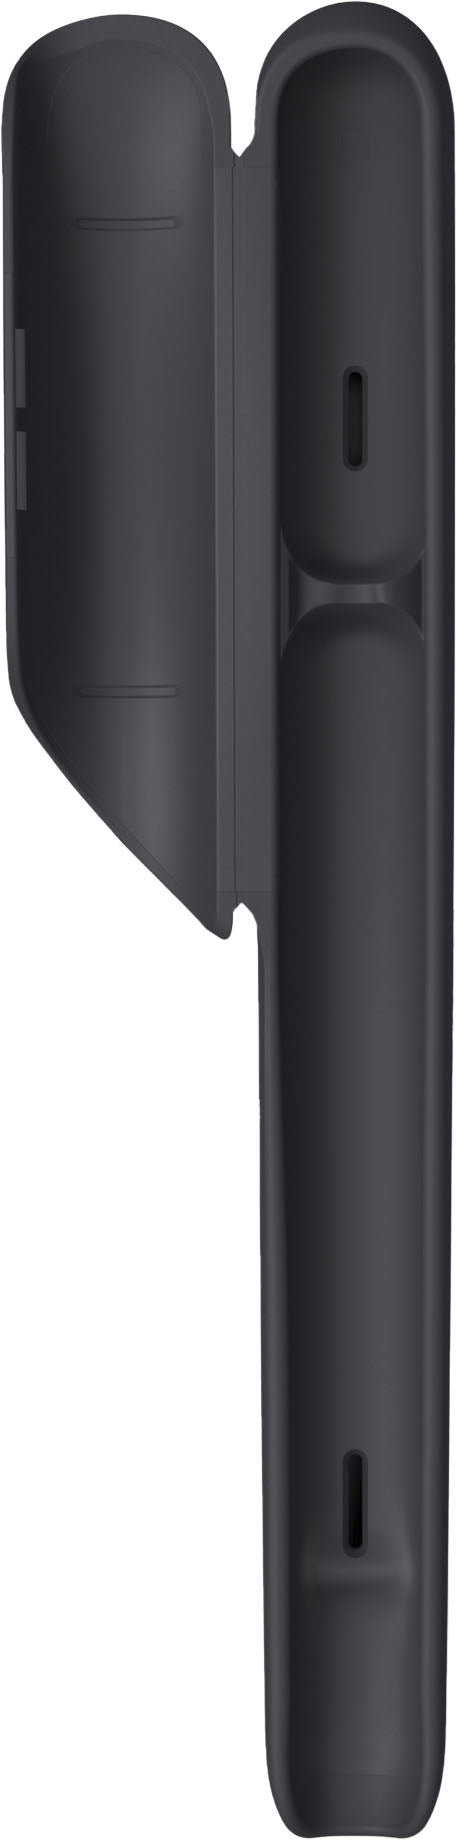 Philips One by Sonicare Rechargeable Toothbrush, Shadow, HY1200/26 - Shadow Black_7